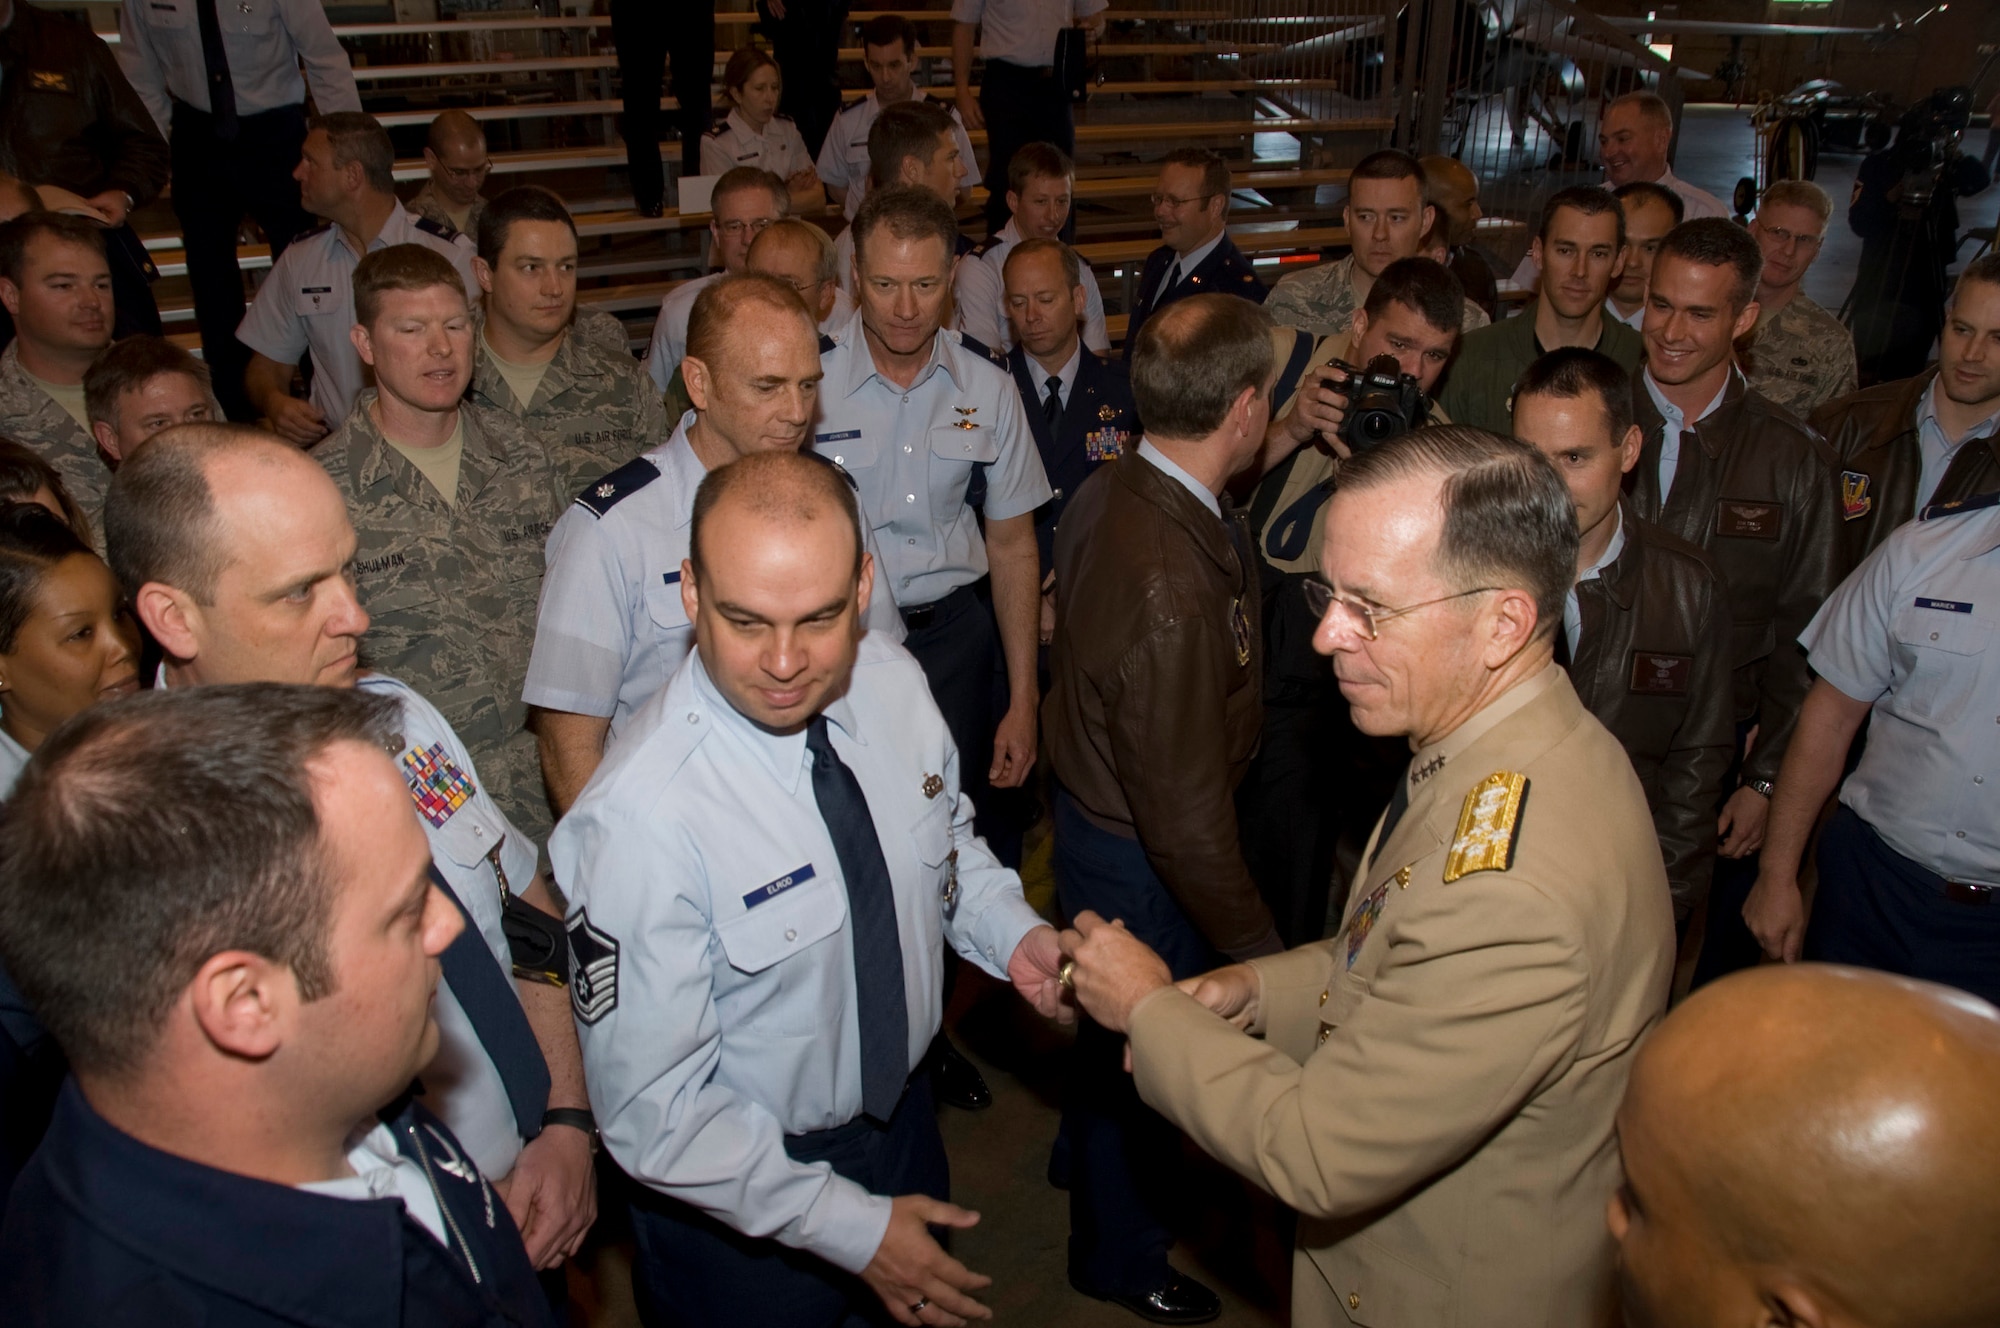 Admiral Mike Mullen, Chairman of the Joint Chiefs of Staff conducted a Town Hall meeting with members of the 140th Wing, Colorado Air National Guard Monday, 26 April 2010.  During the meeting, members of the Air National Guard posed questions concerning the future of the Guard.  Picture here, Admiral meets members of the 140th Wing and presents MSgt Gregory Elrod, 140th Security Forces Squadron, and others with a coin as a token of his appreciation for their service.  (U.S. Air Force Photo/SMSgt John Rohrer) ( RELEASED)